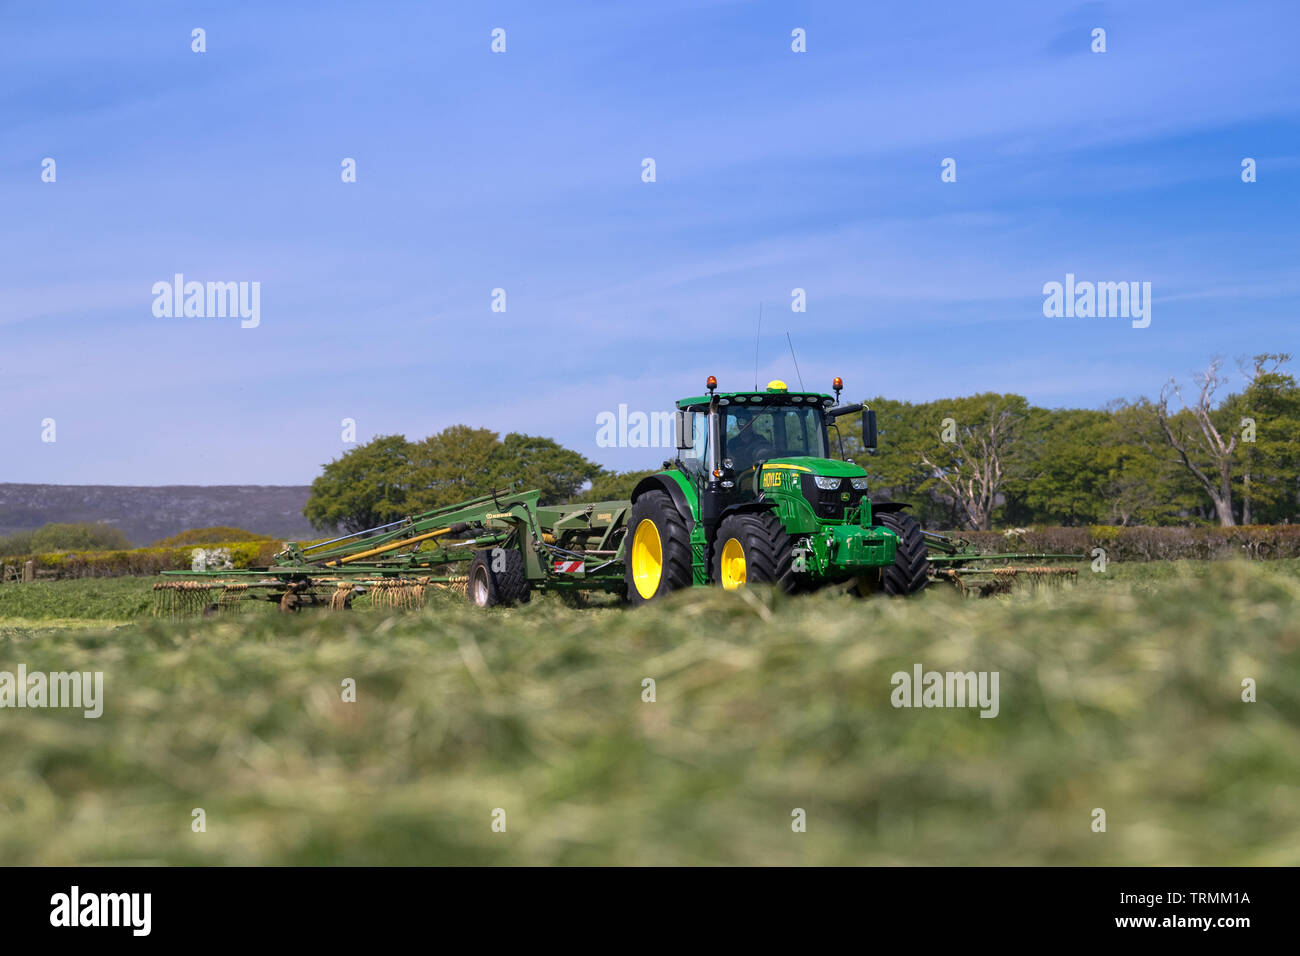 Contractor rowing up grass for silage with a Krone Swadro rake pulled by a John Deere 6145R, Lancaster, Lancashire, UK. Stock Photo